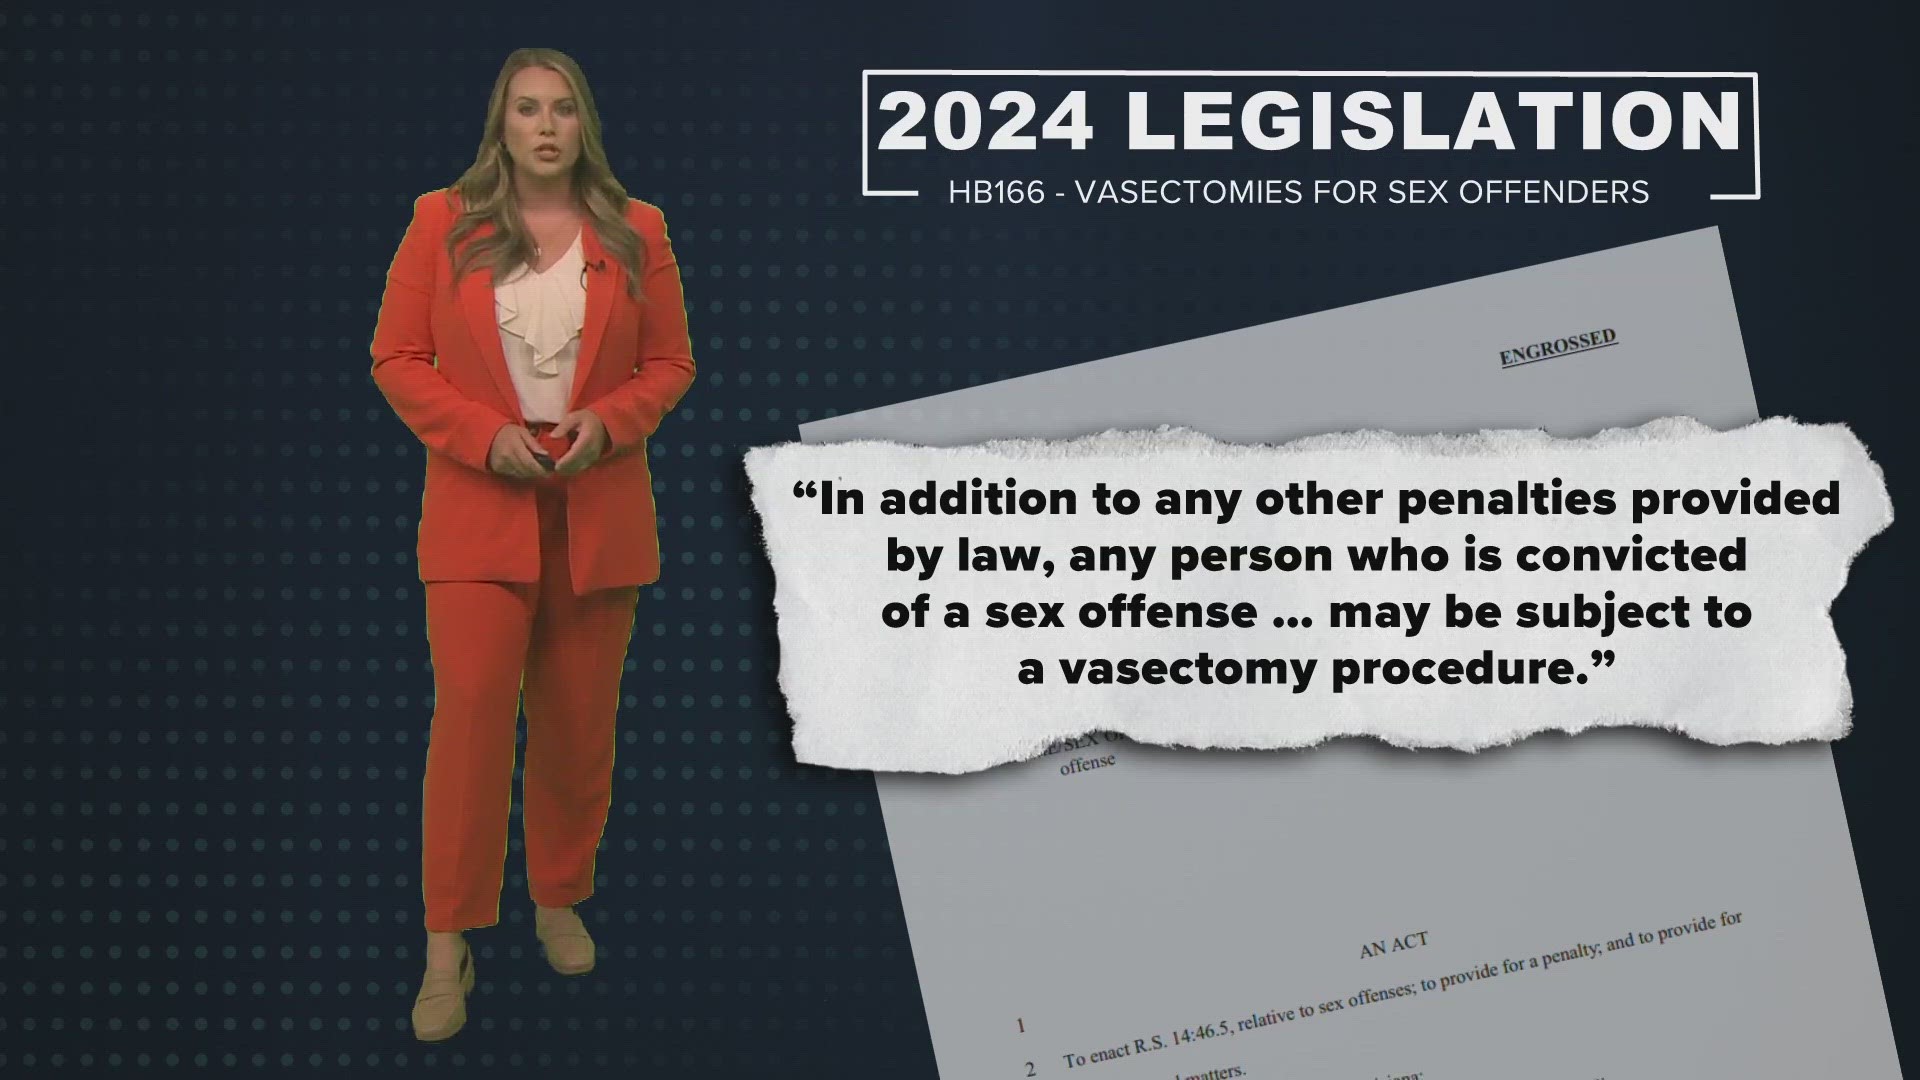 In your Breakdown: should penalties against convicted sex offenders include vasectomies?